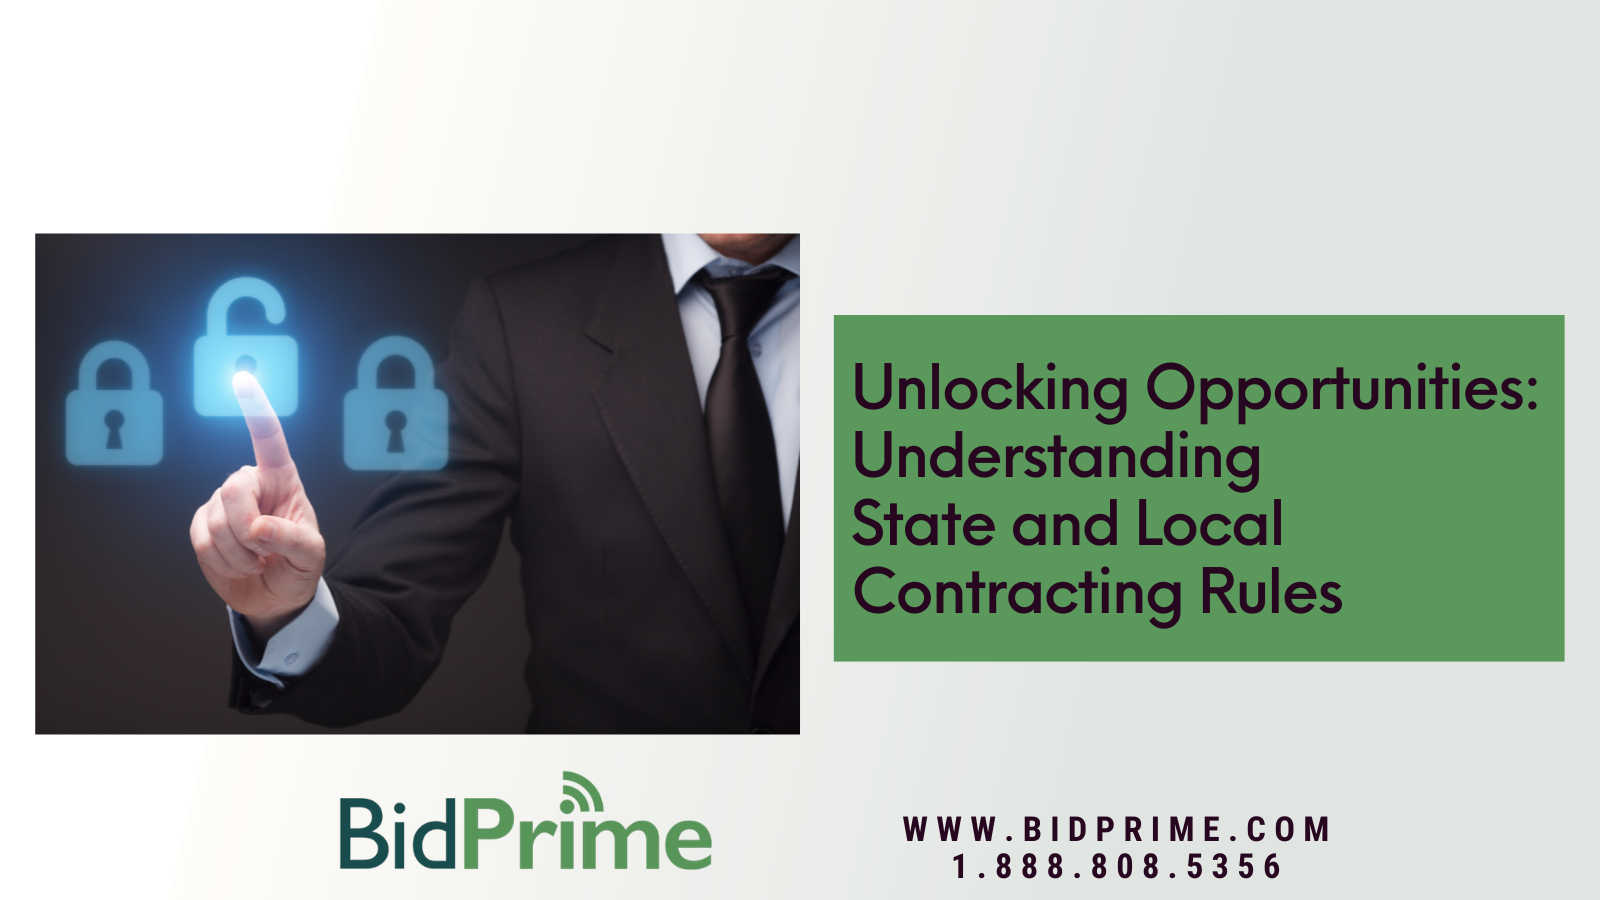 Unlocking Opportunities: Understanding State and Local Contracting Rules